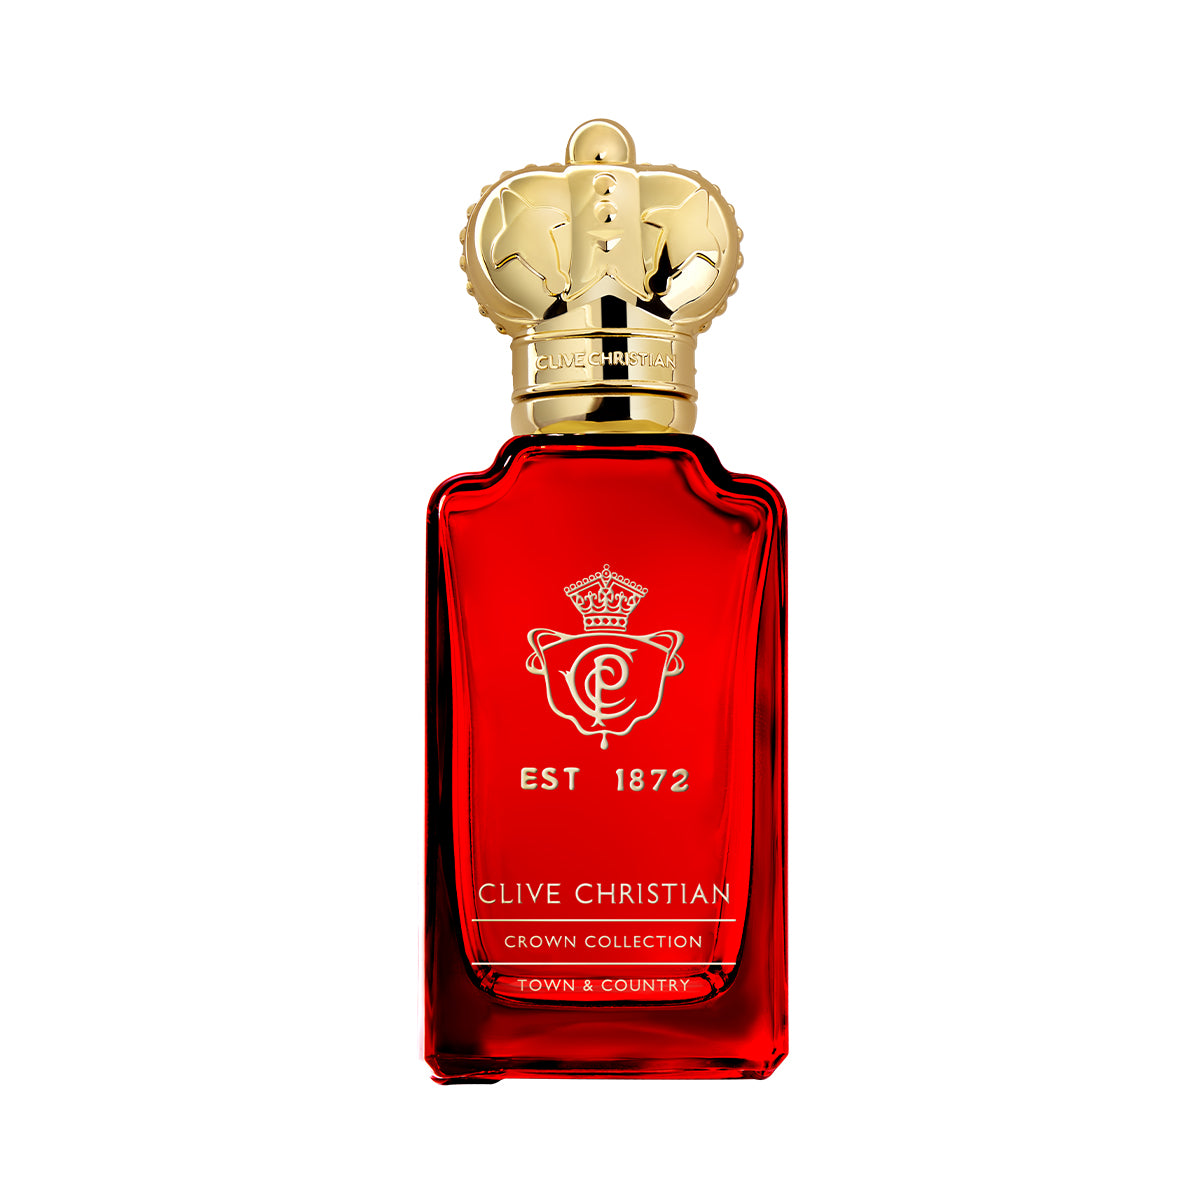 Town & Country - Clive Christian - Parfum 50 ml